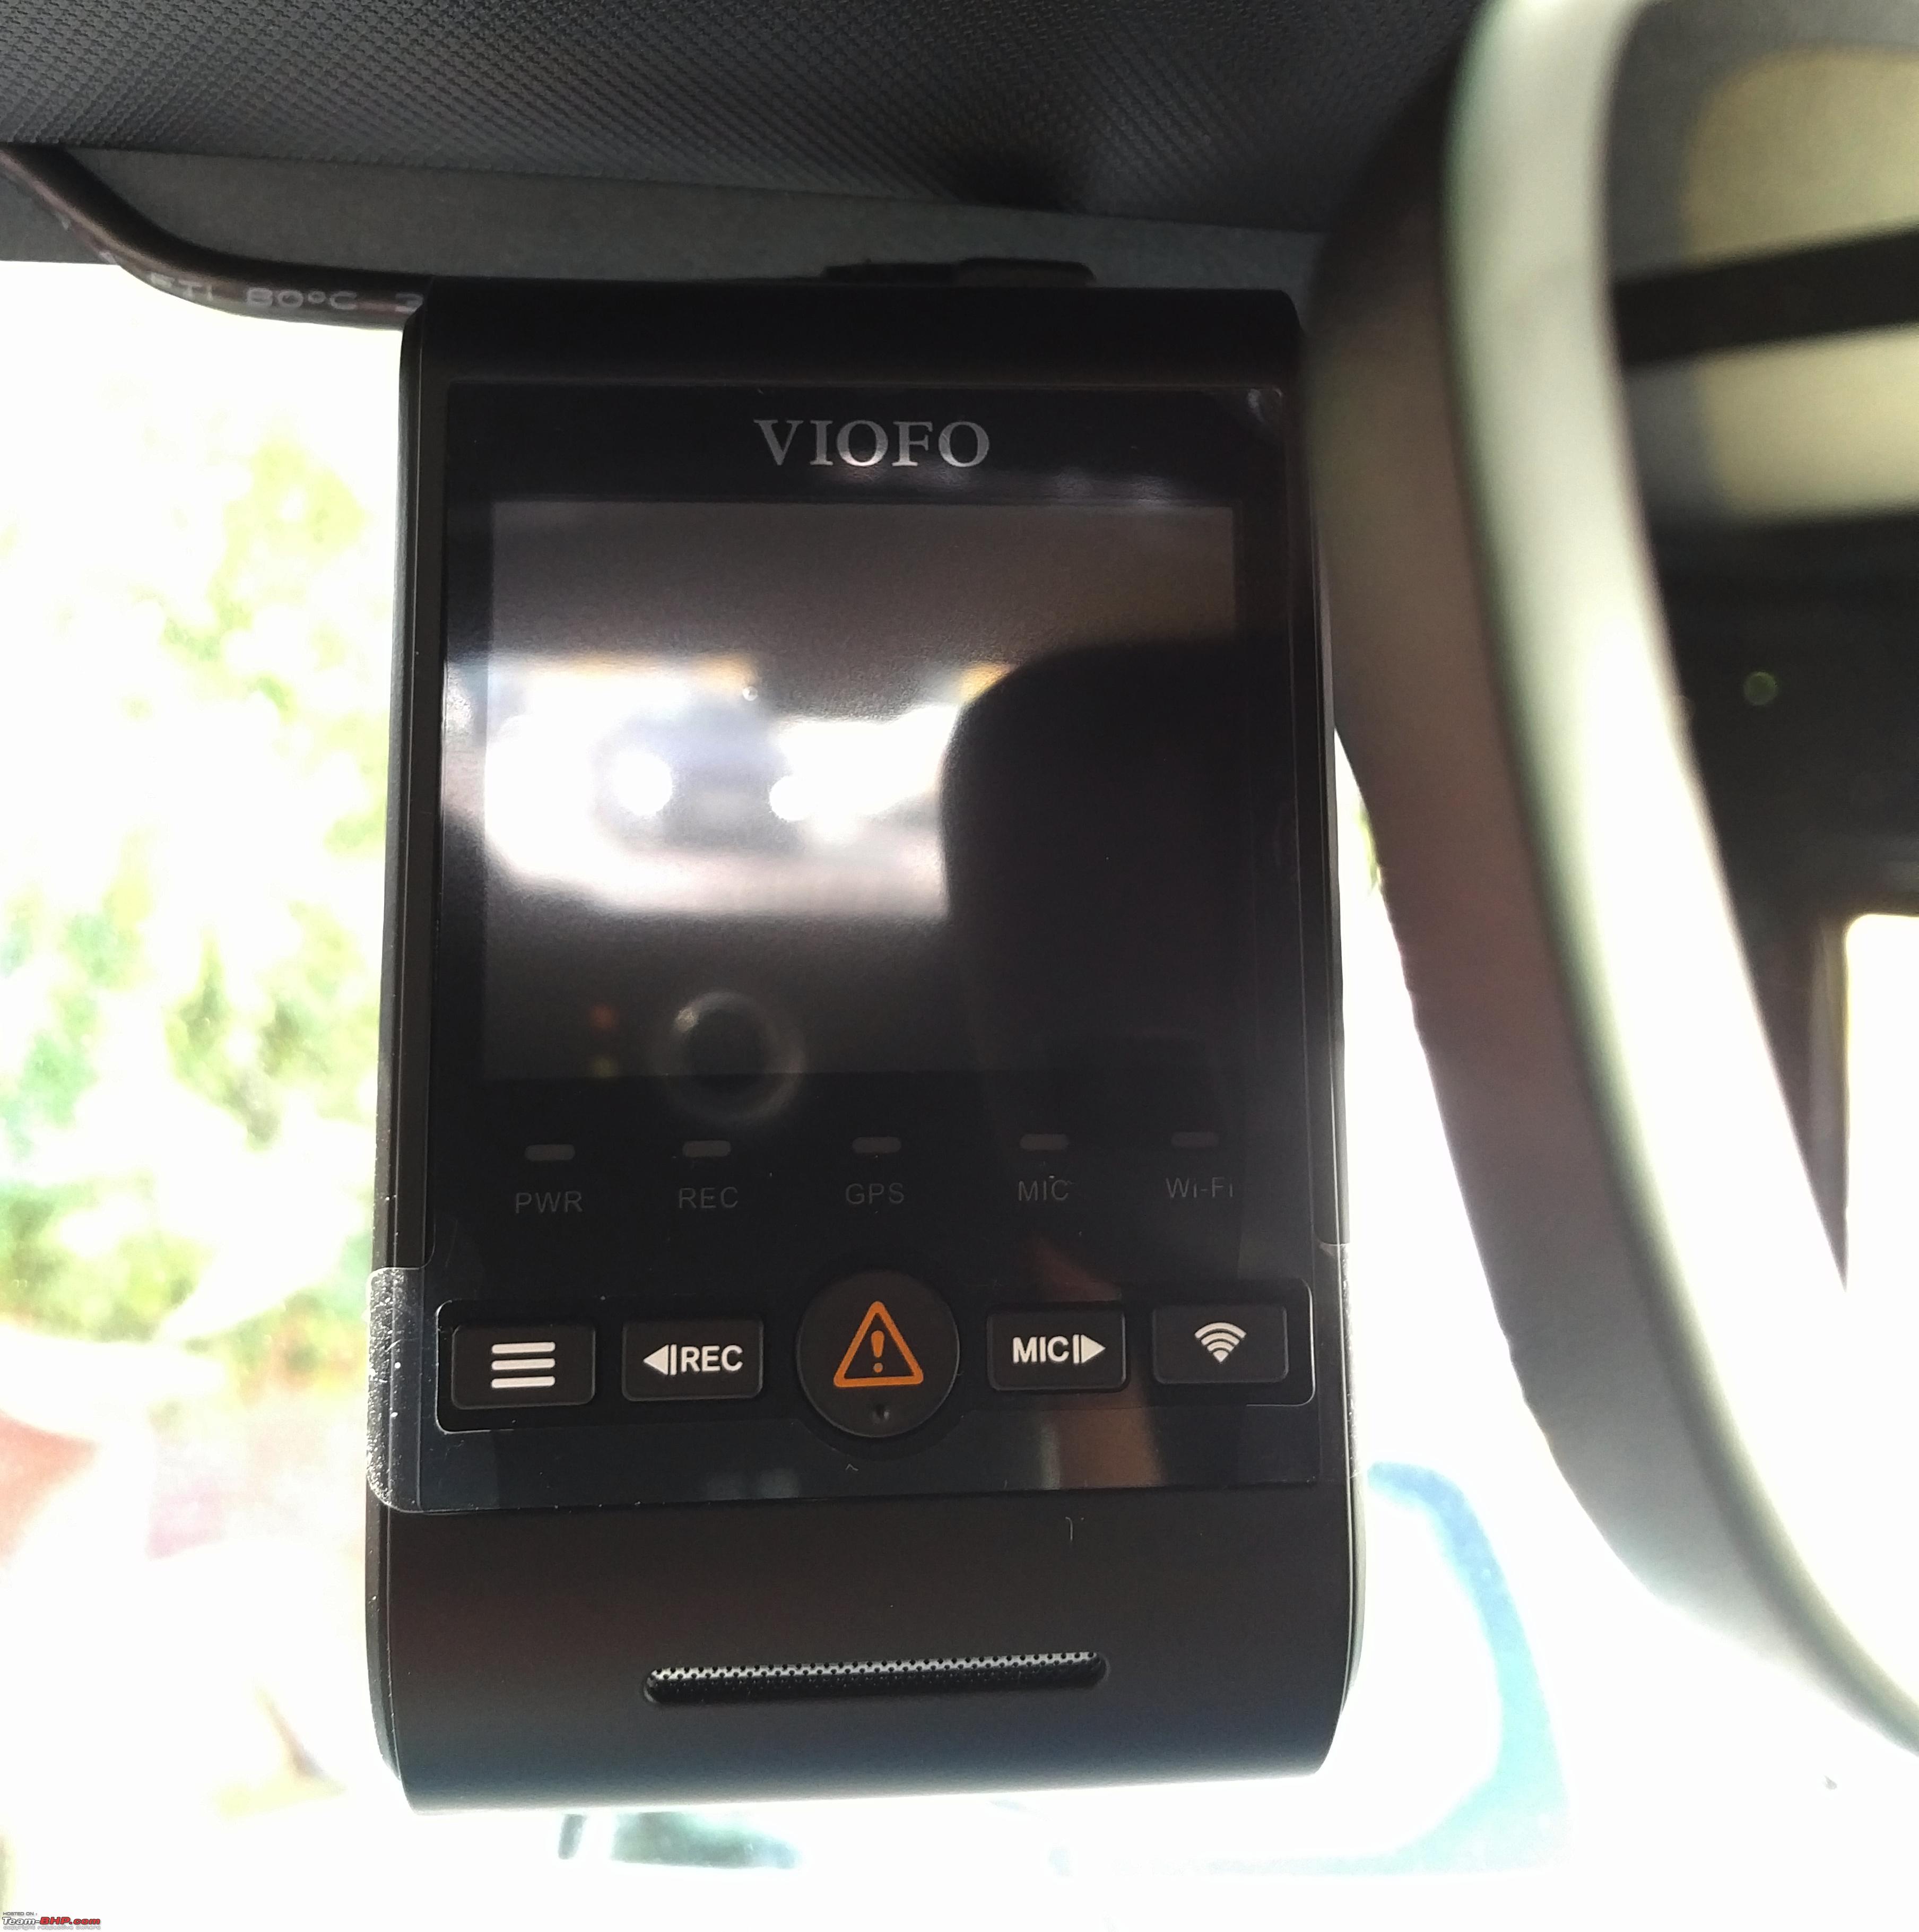 https://www.team-bhp.com/forum/attachments/modifications-accessories/2340765d1659355339-viofo-a229-duo-front-rear-dashcam-review-initial-impressions-img_20220801_1552051.jpg